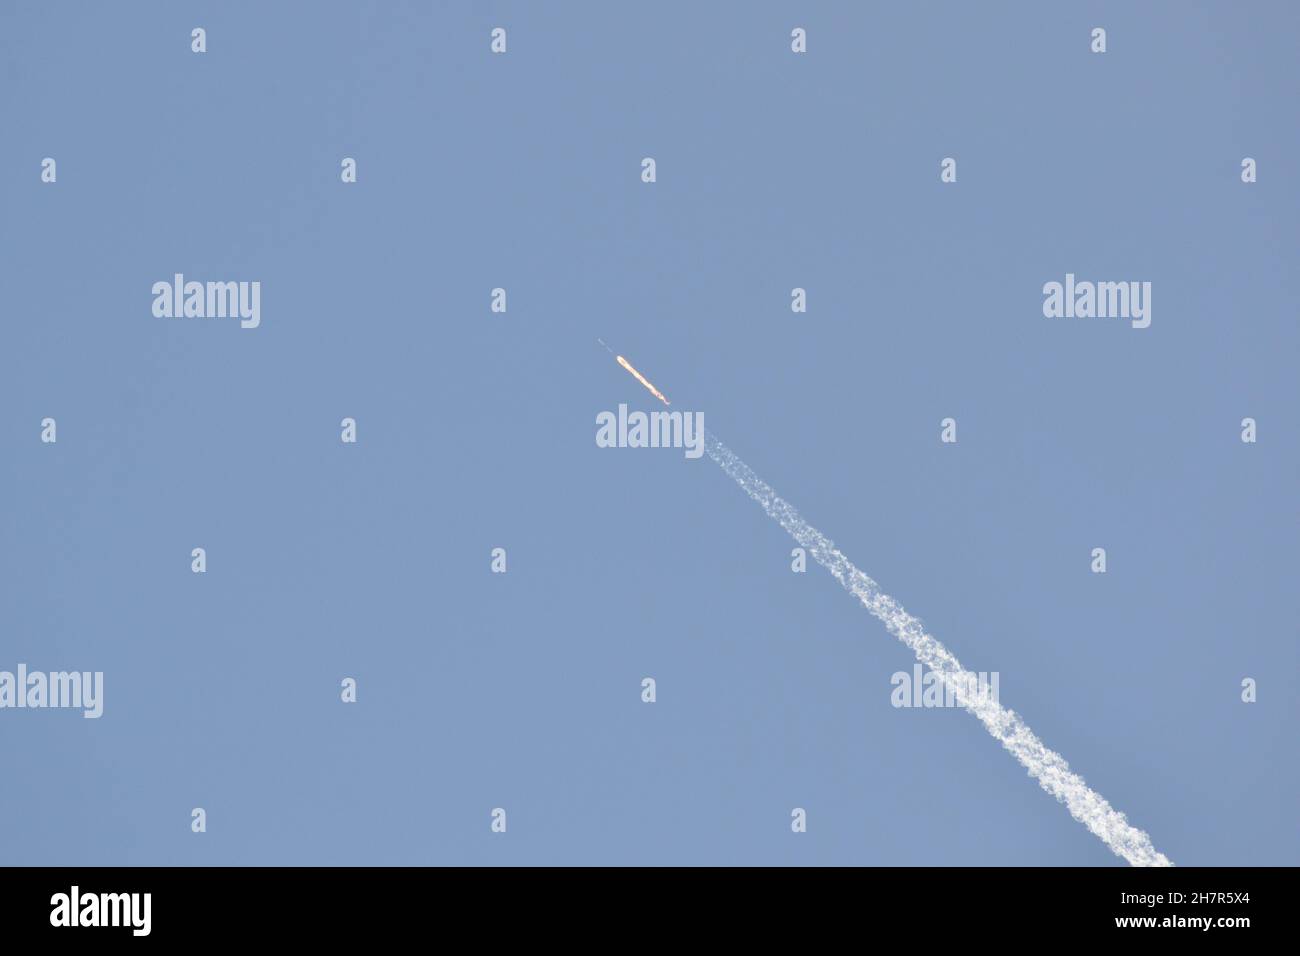 SpaceX's Falcon 9 rocket blasts off carrying Starlink satellites into orbit. Stock Photo